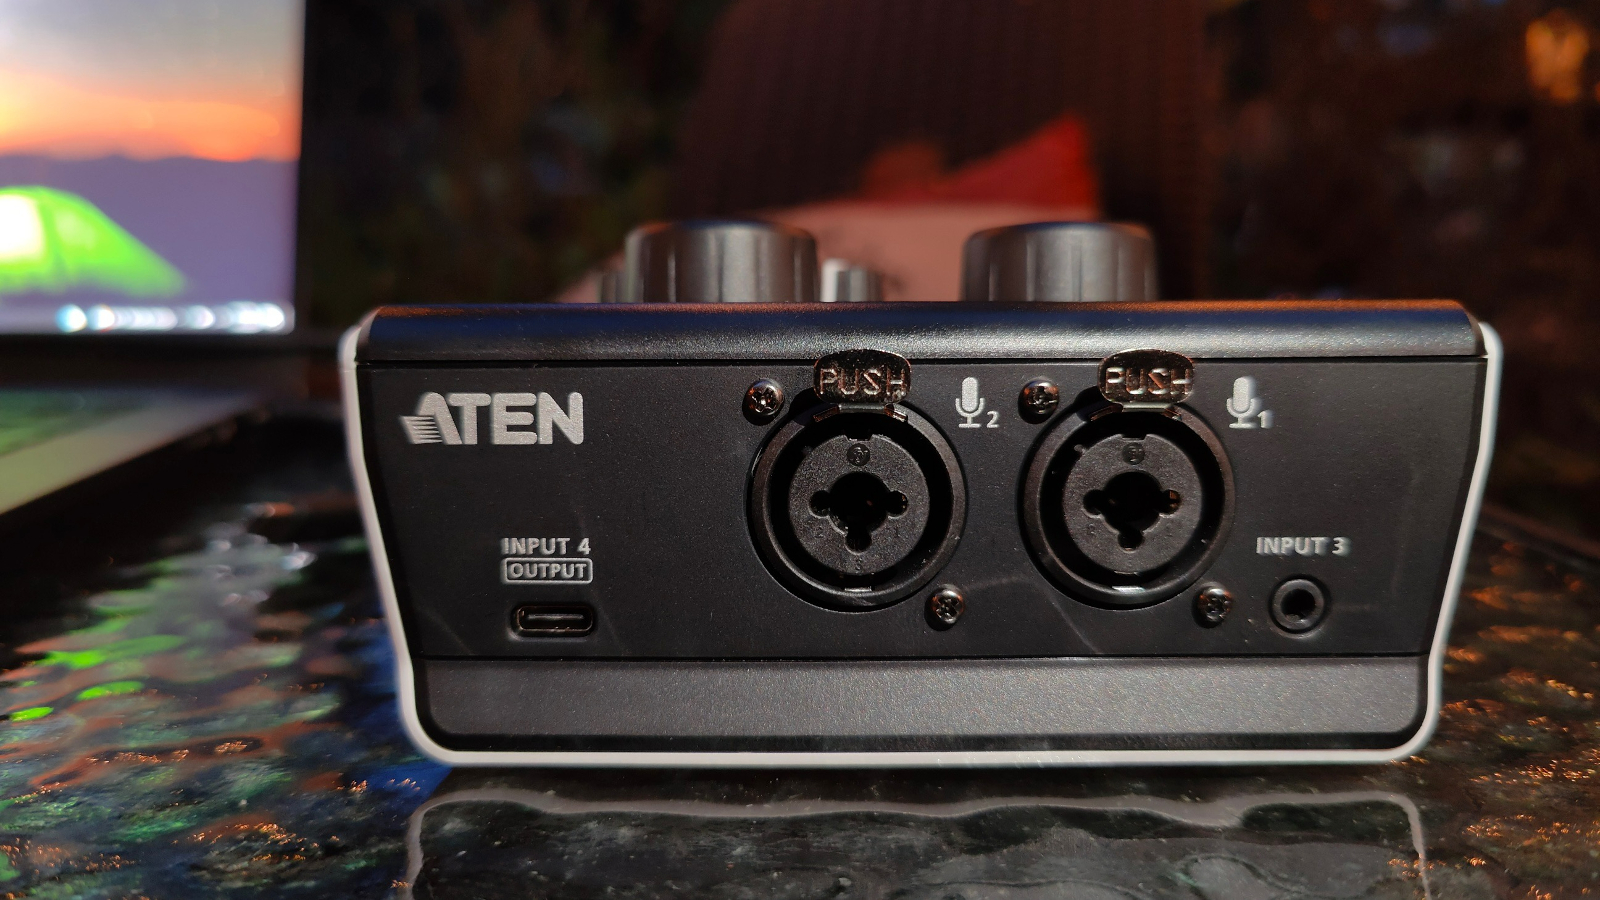 Aten Podcast AI Audio Mixer (MicLive 6-CH, UC8000) review